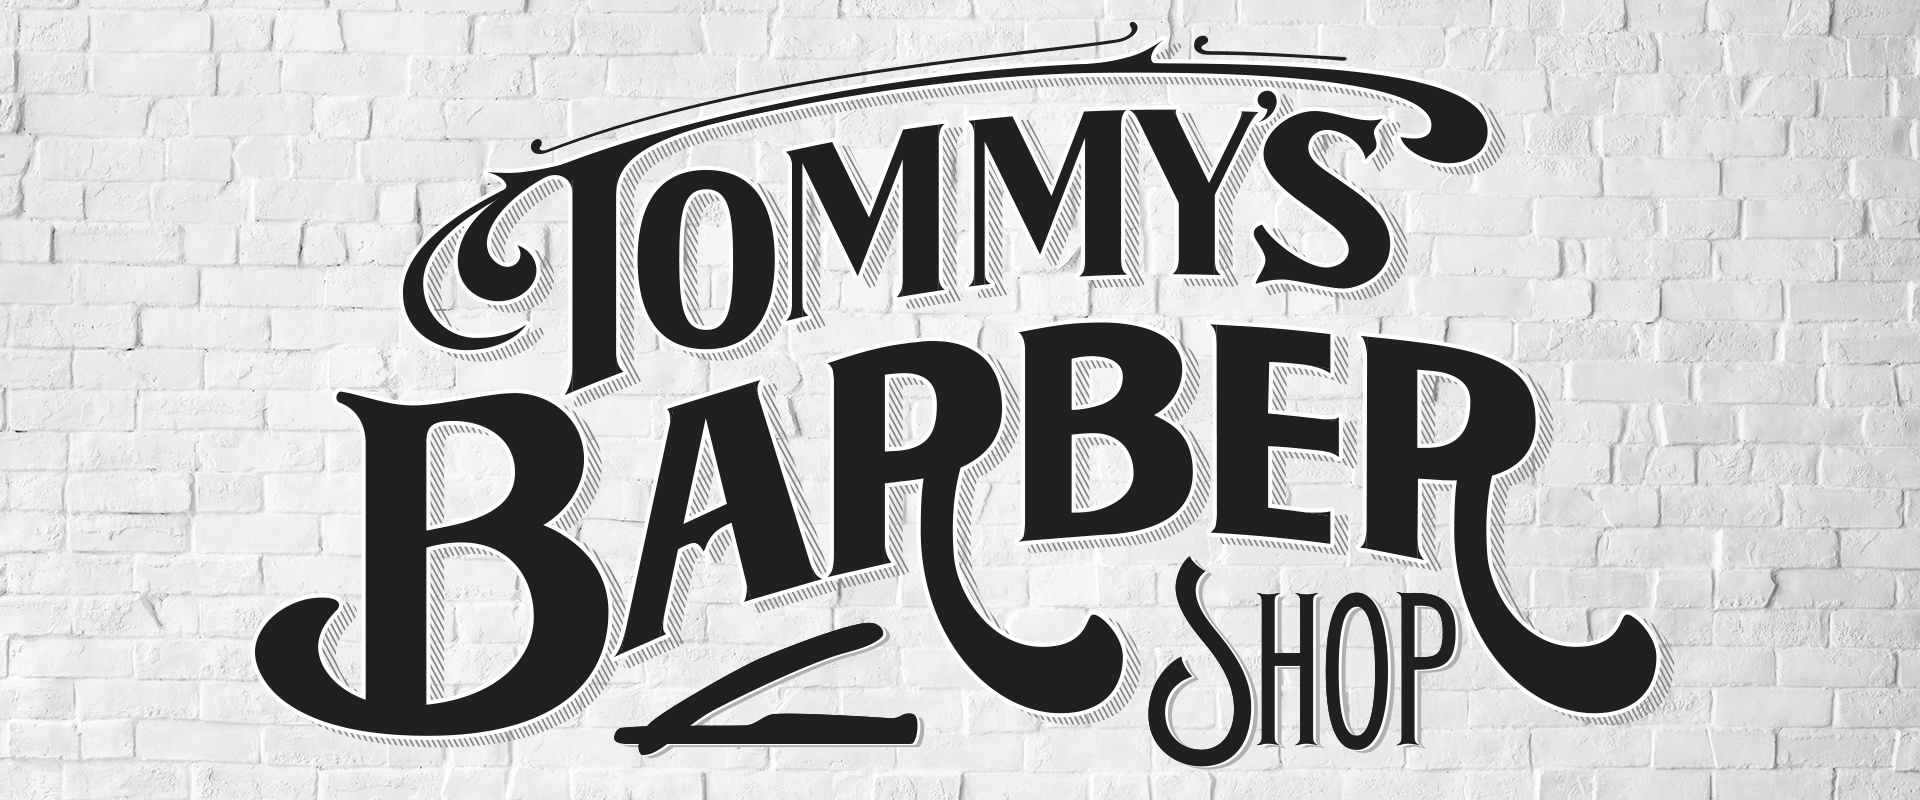 Tommy's Barber Shop – Lettering design on the brick wall...